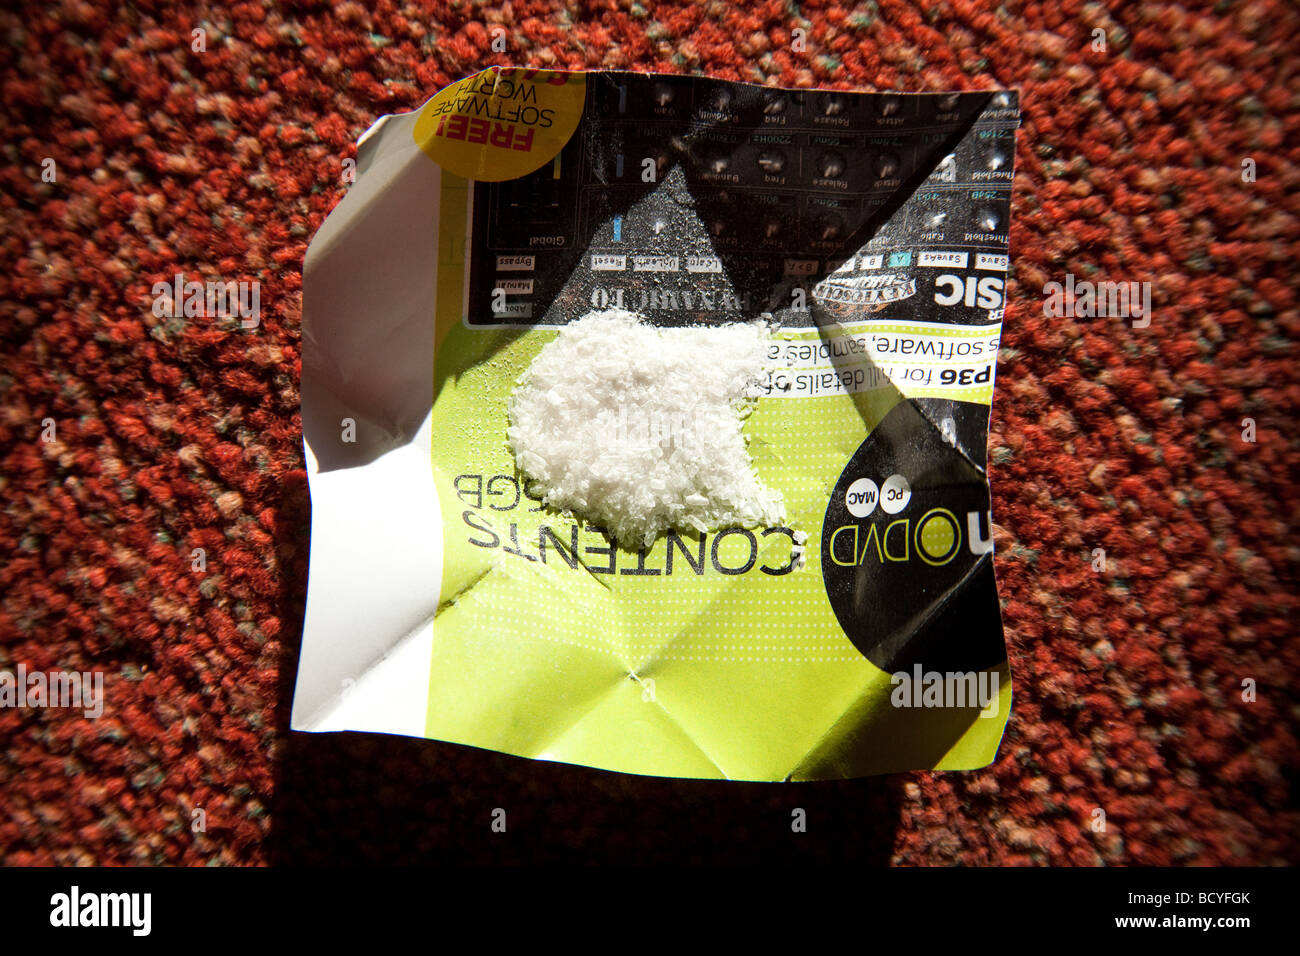 1 gram wrap of Ketamine in its powdered form. Ketamine is a horse tranquilizer commonly used as a Narcotic. Stock Photo